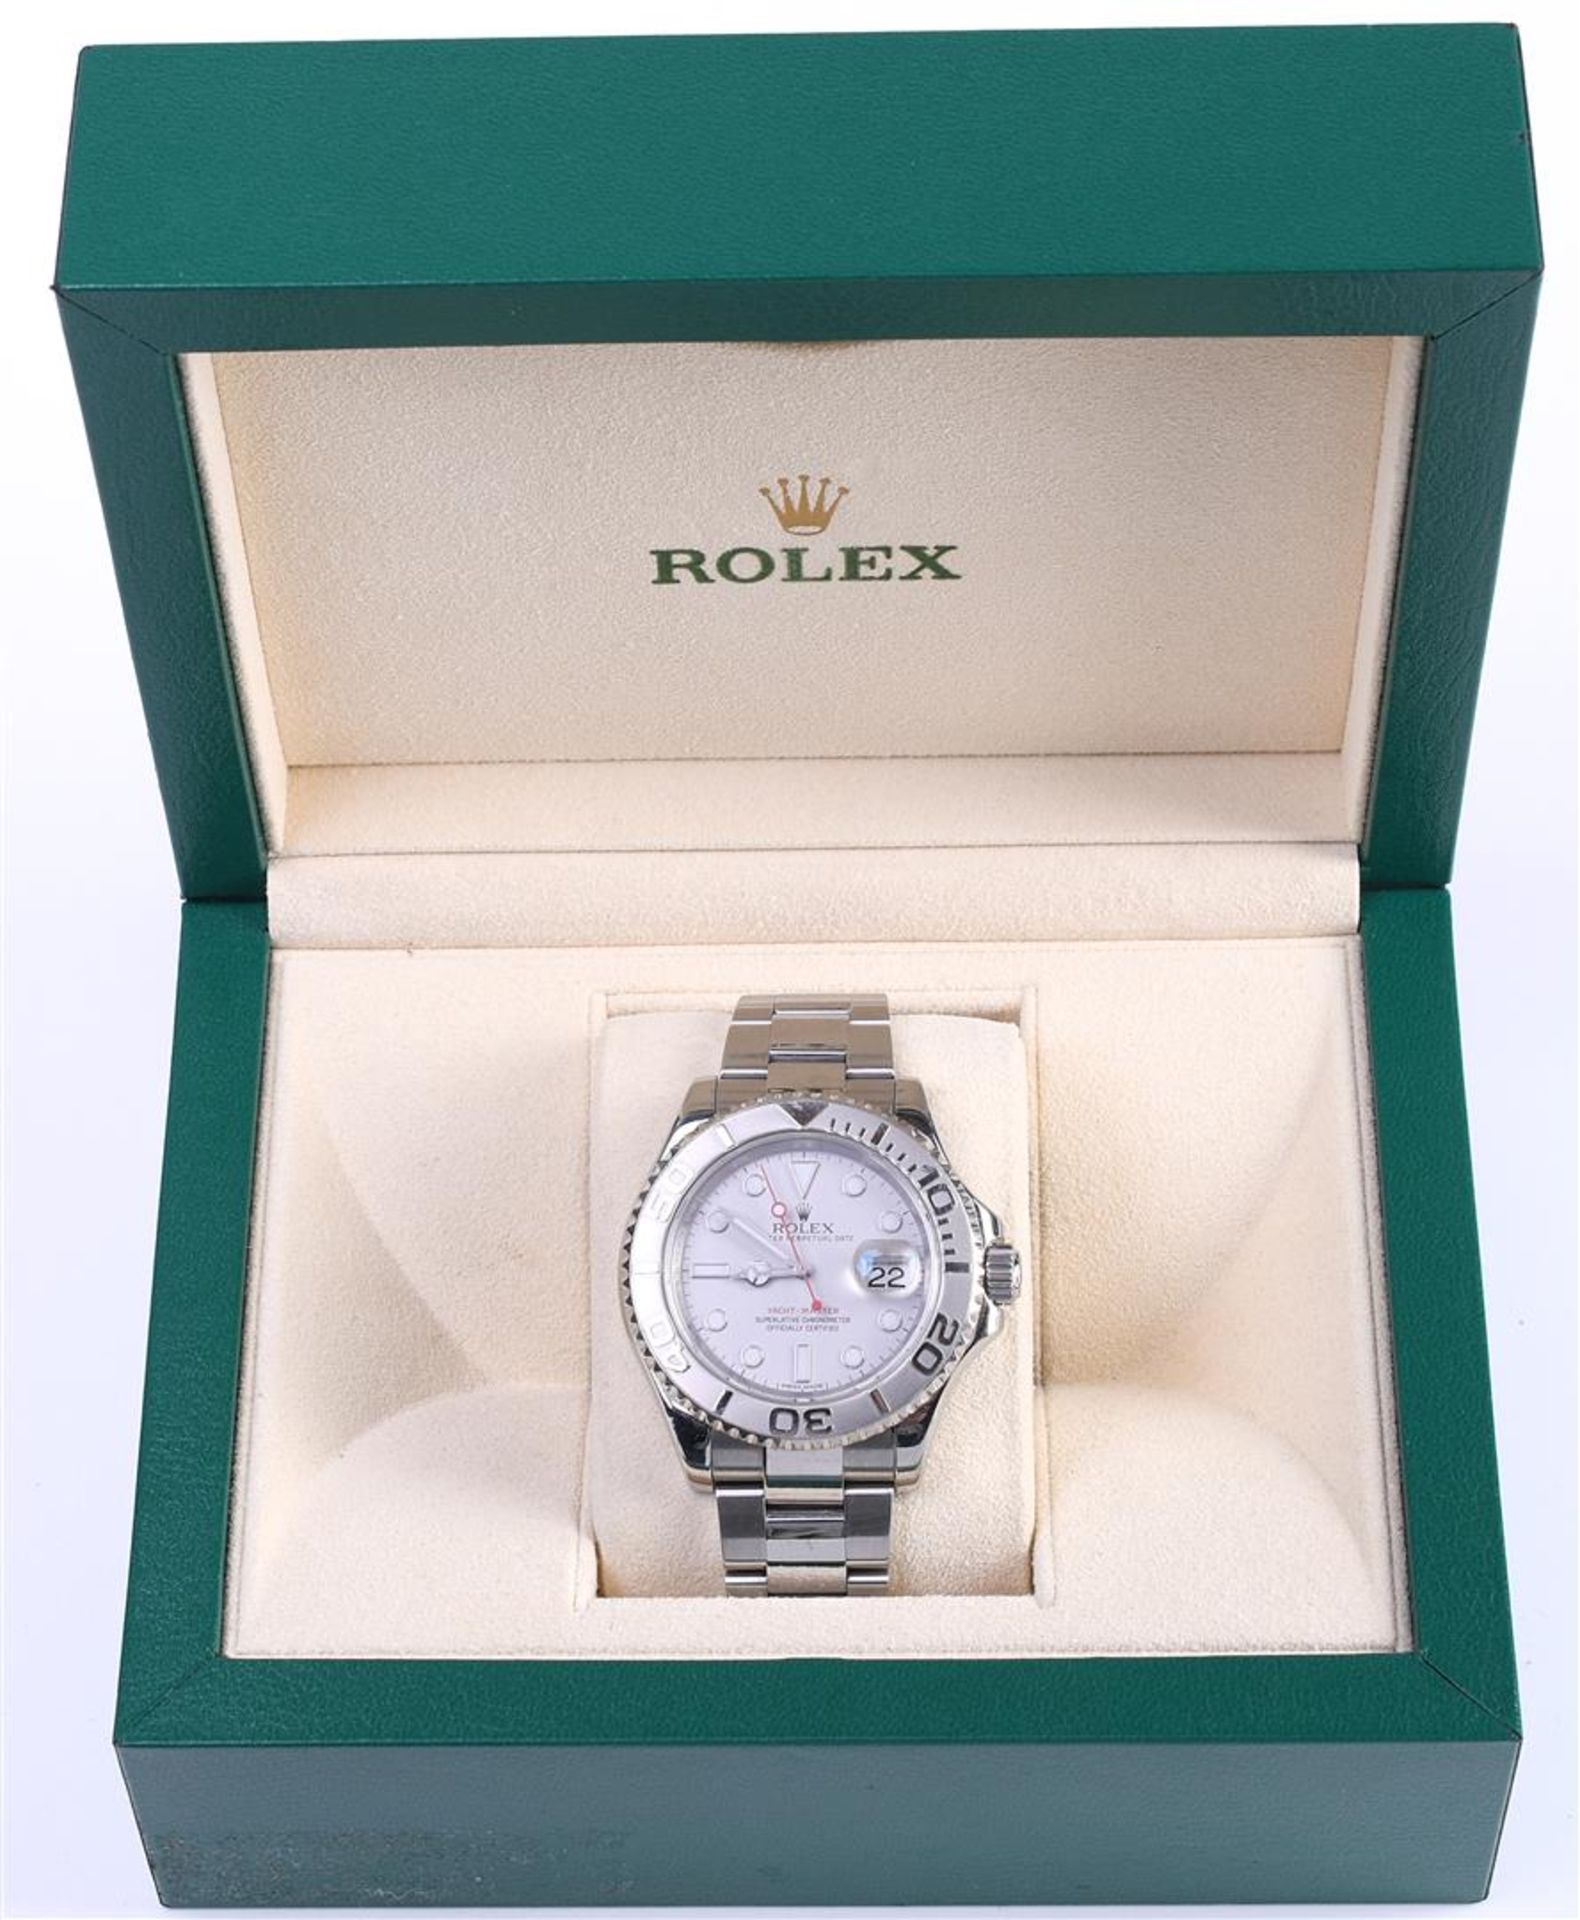 Rolex - Yacht-Master - 168622 - Unisex - 2000-2010. 40 MM. Including box and papers. Runs - Image 7 of 7